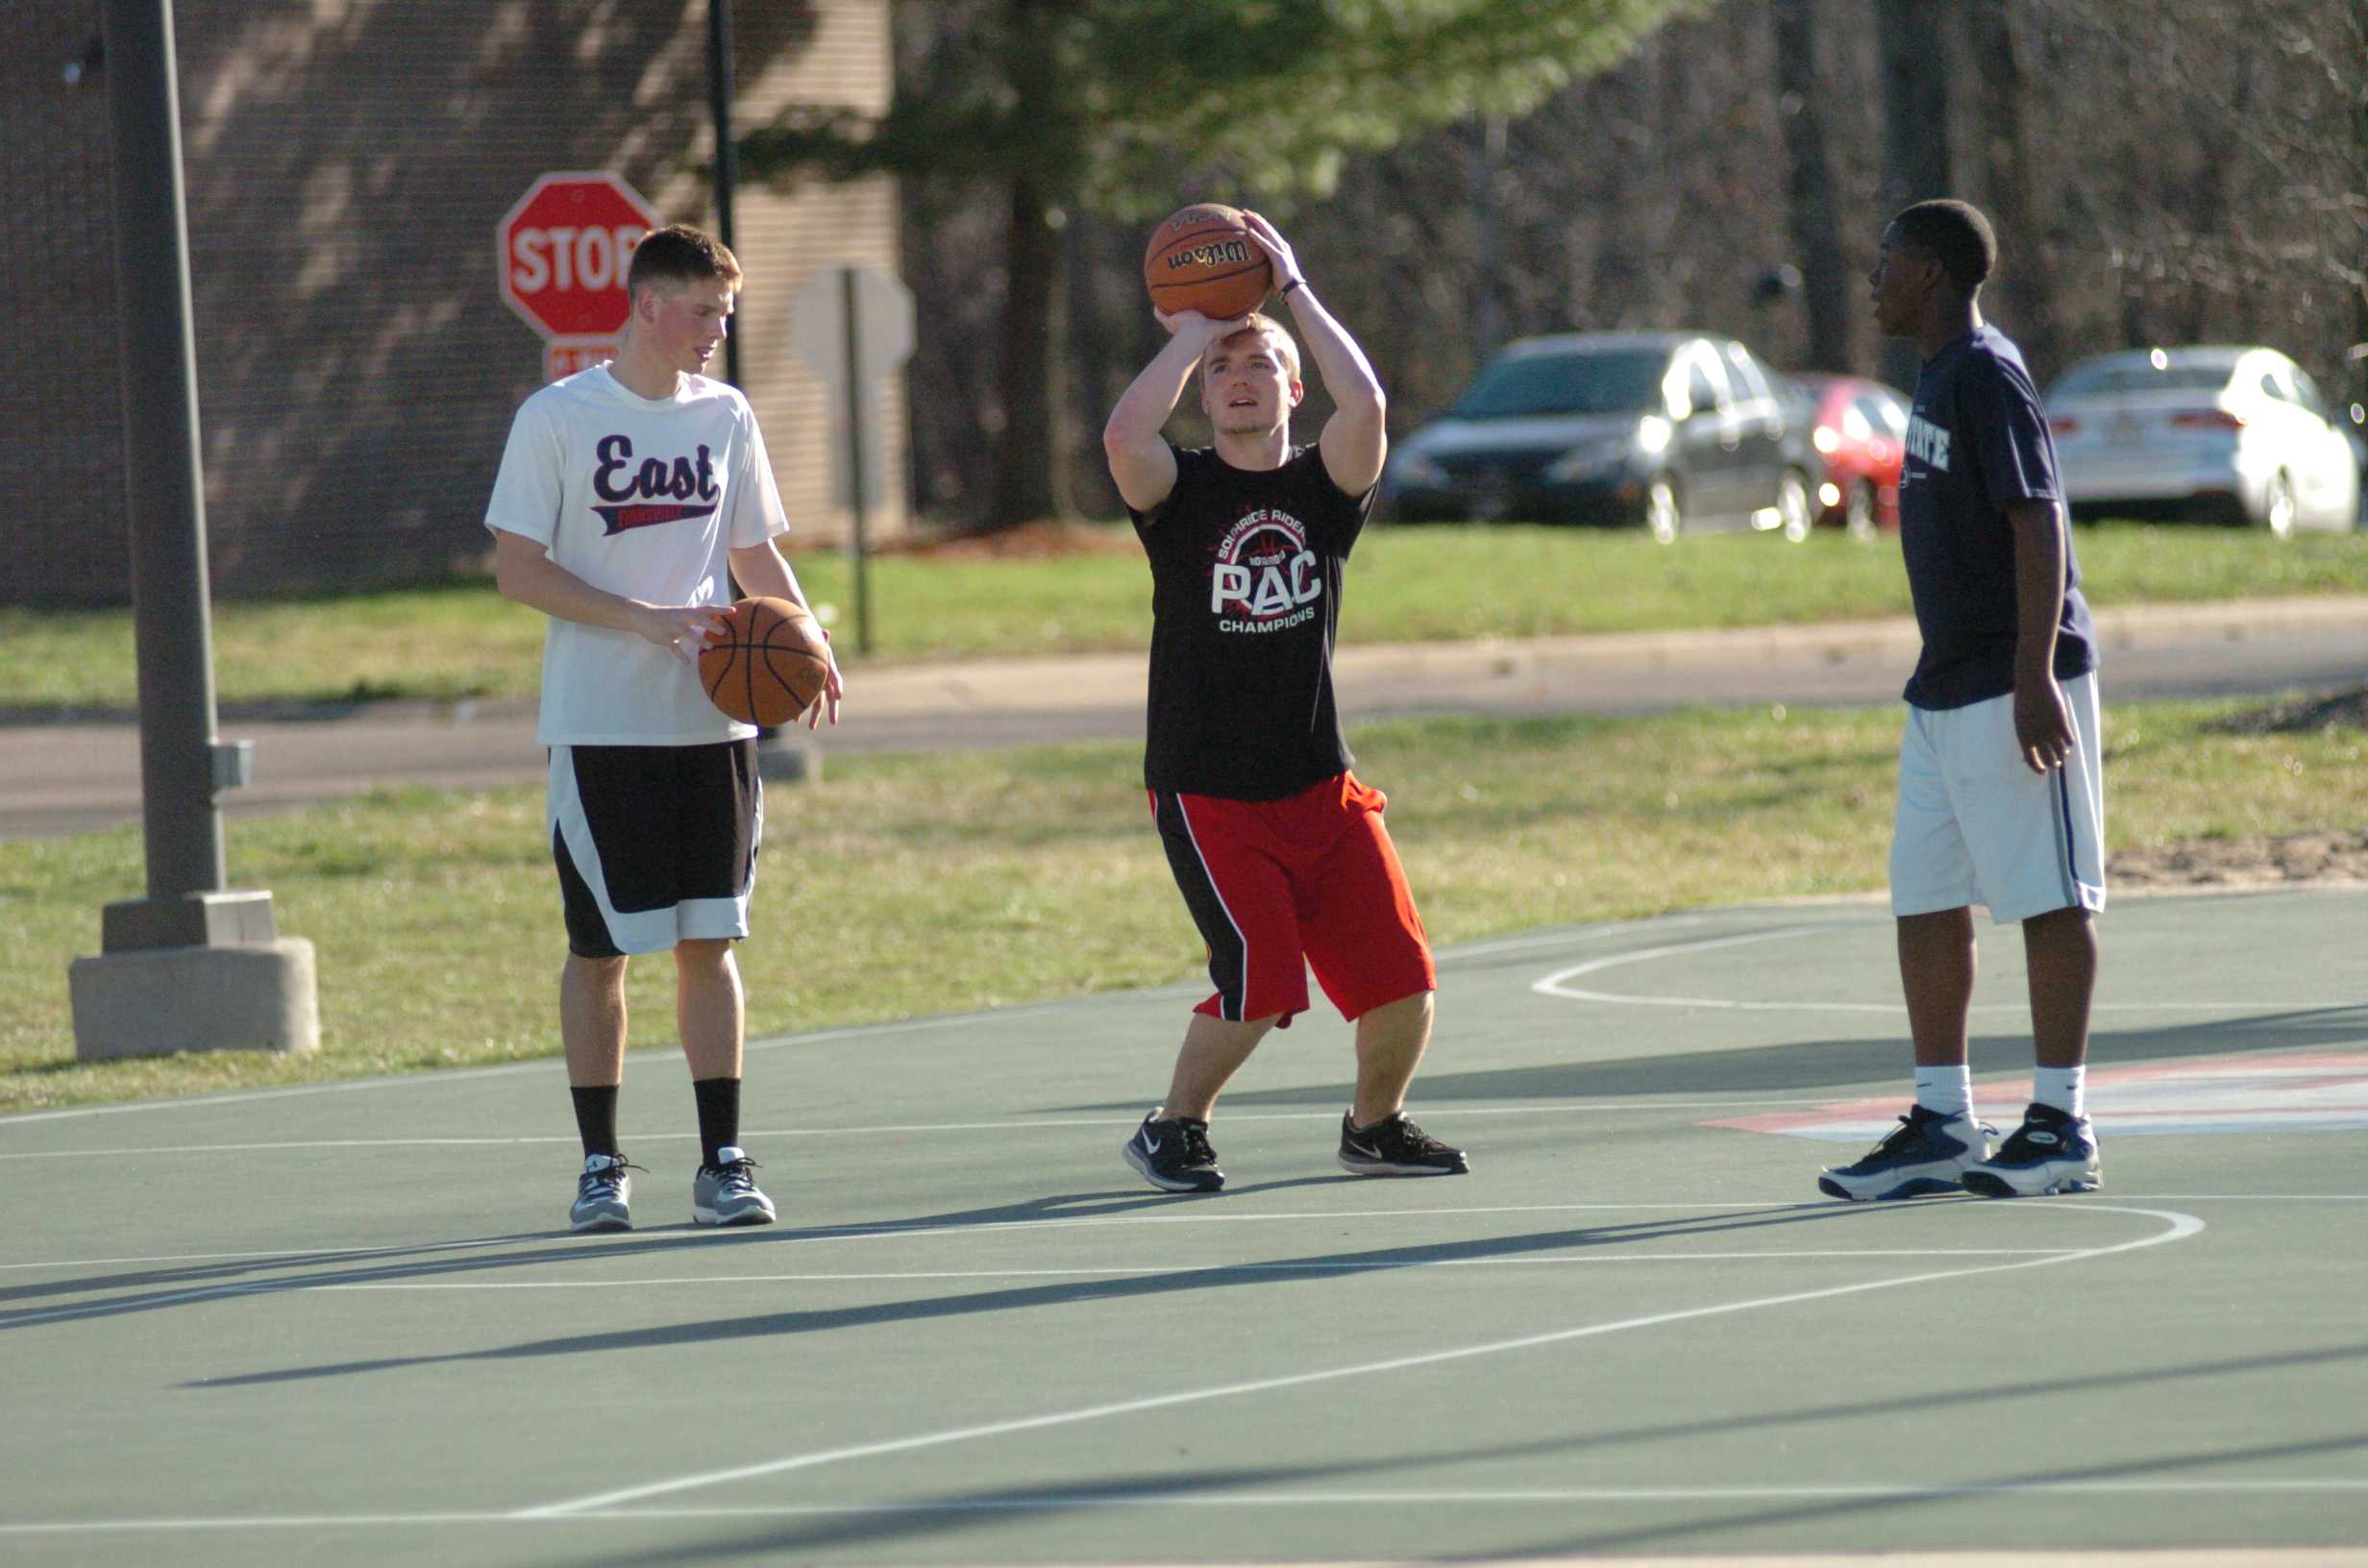 Sophomore engineering major Ian Mathies and sophomore elementary education major Nicholas Herron play basketball outside of the C-store with a friend's brother, Corey Kirkland, 13 (left to right). Both students live in the Marshall apartment complex on campus. Photo by Bobby Shipman/The Shield